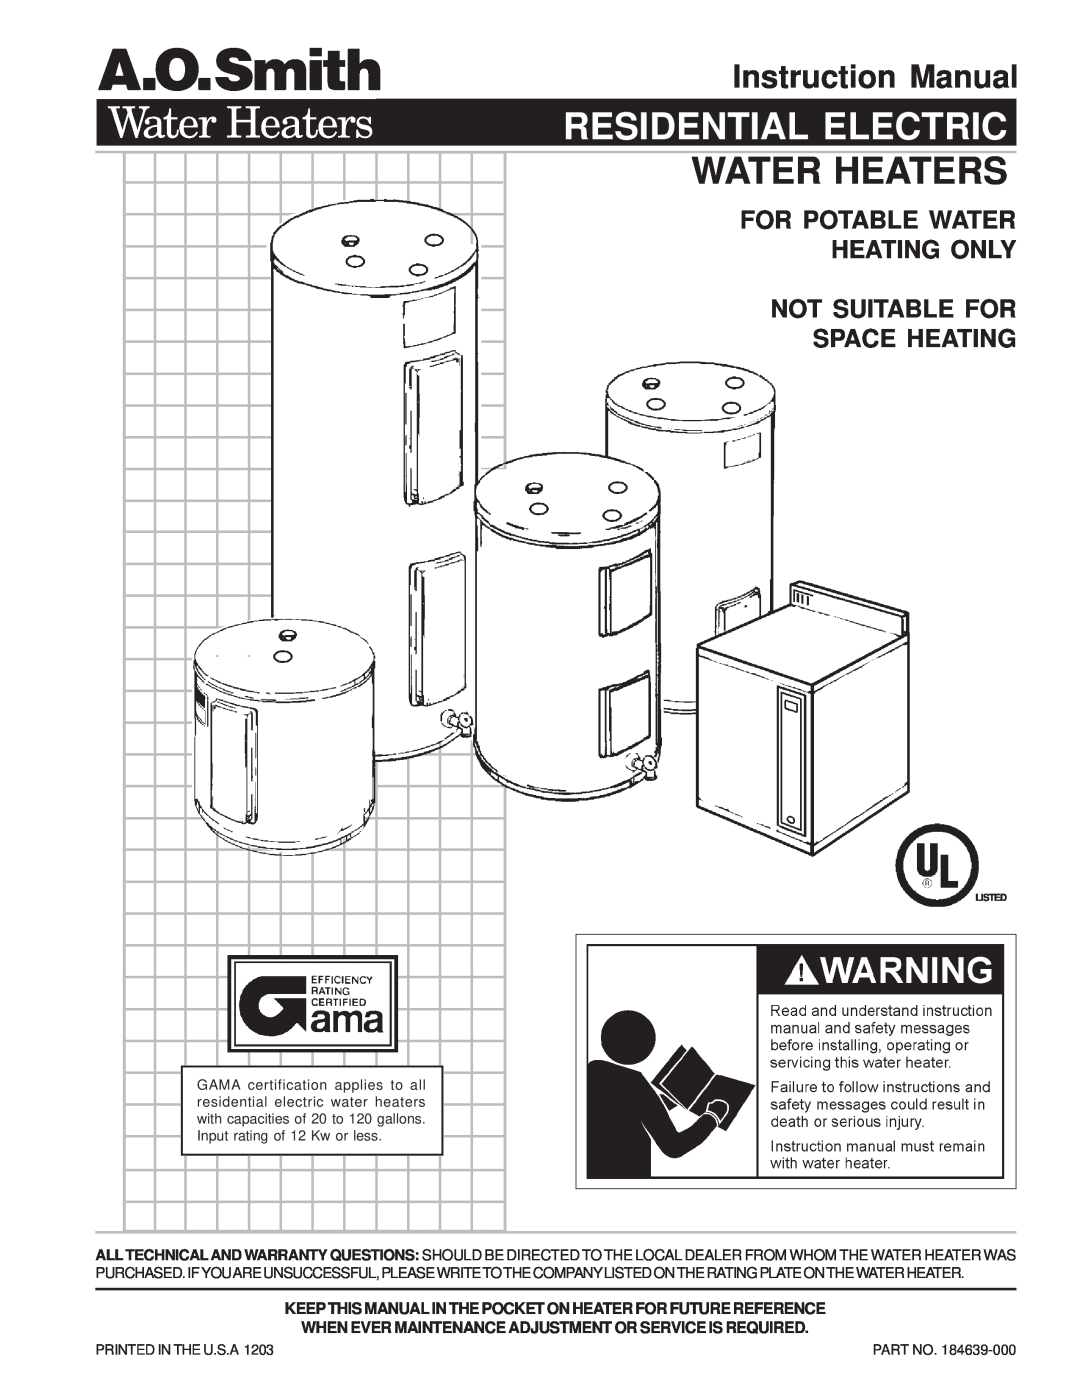 A.O. Smith WATER HEATERS instruction manual Residential Electric, Water Heaters, Space Heating 